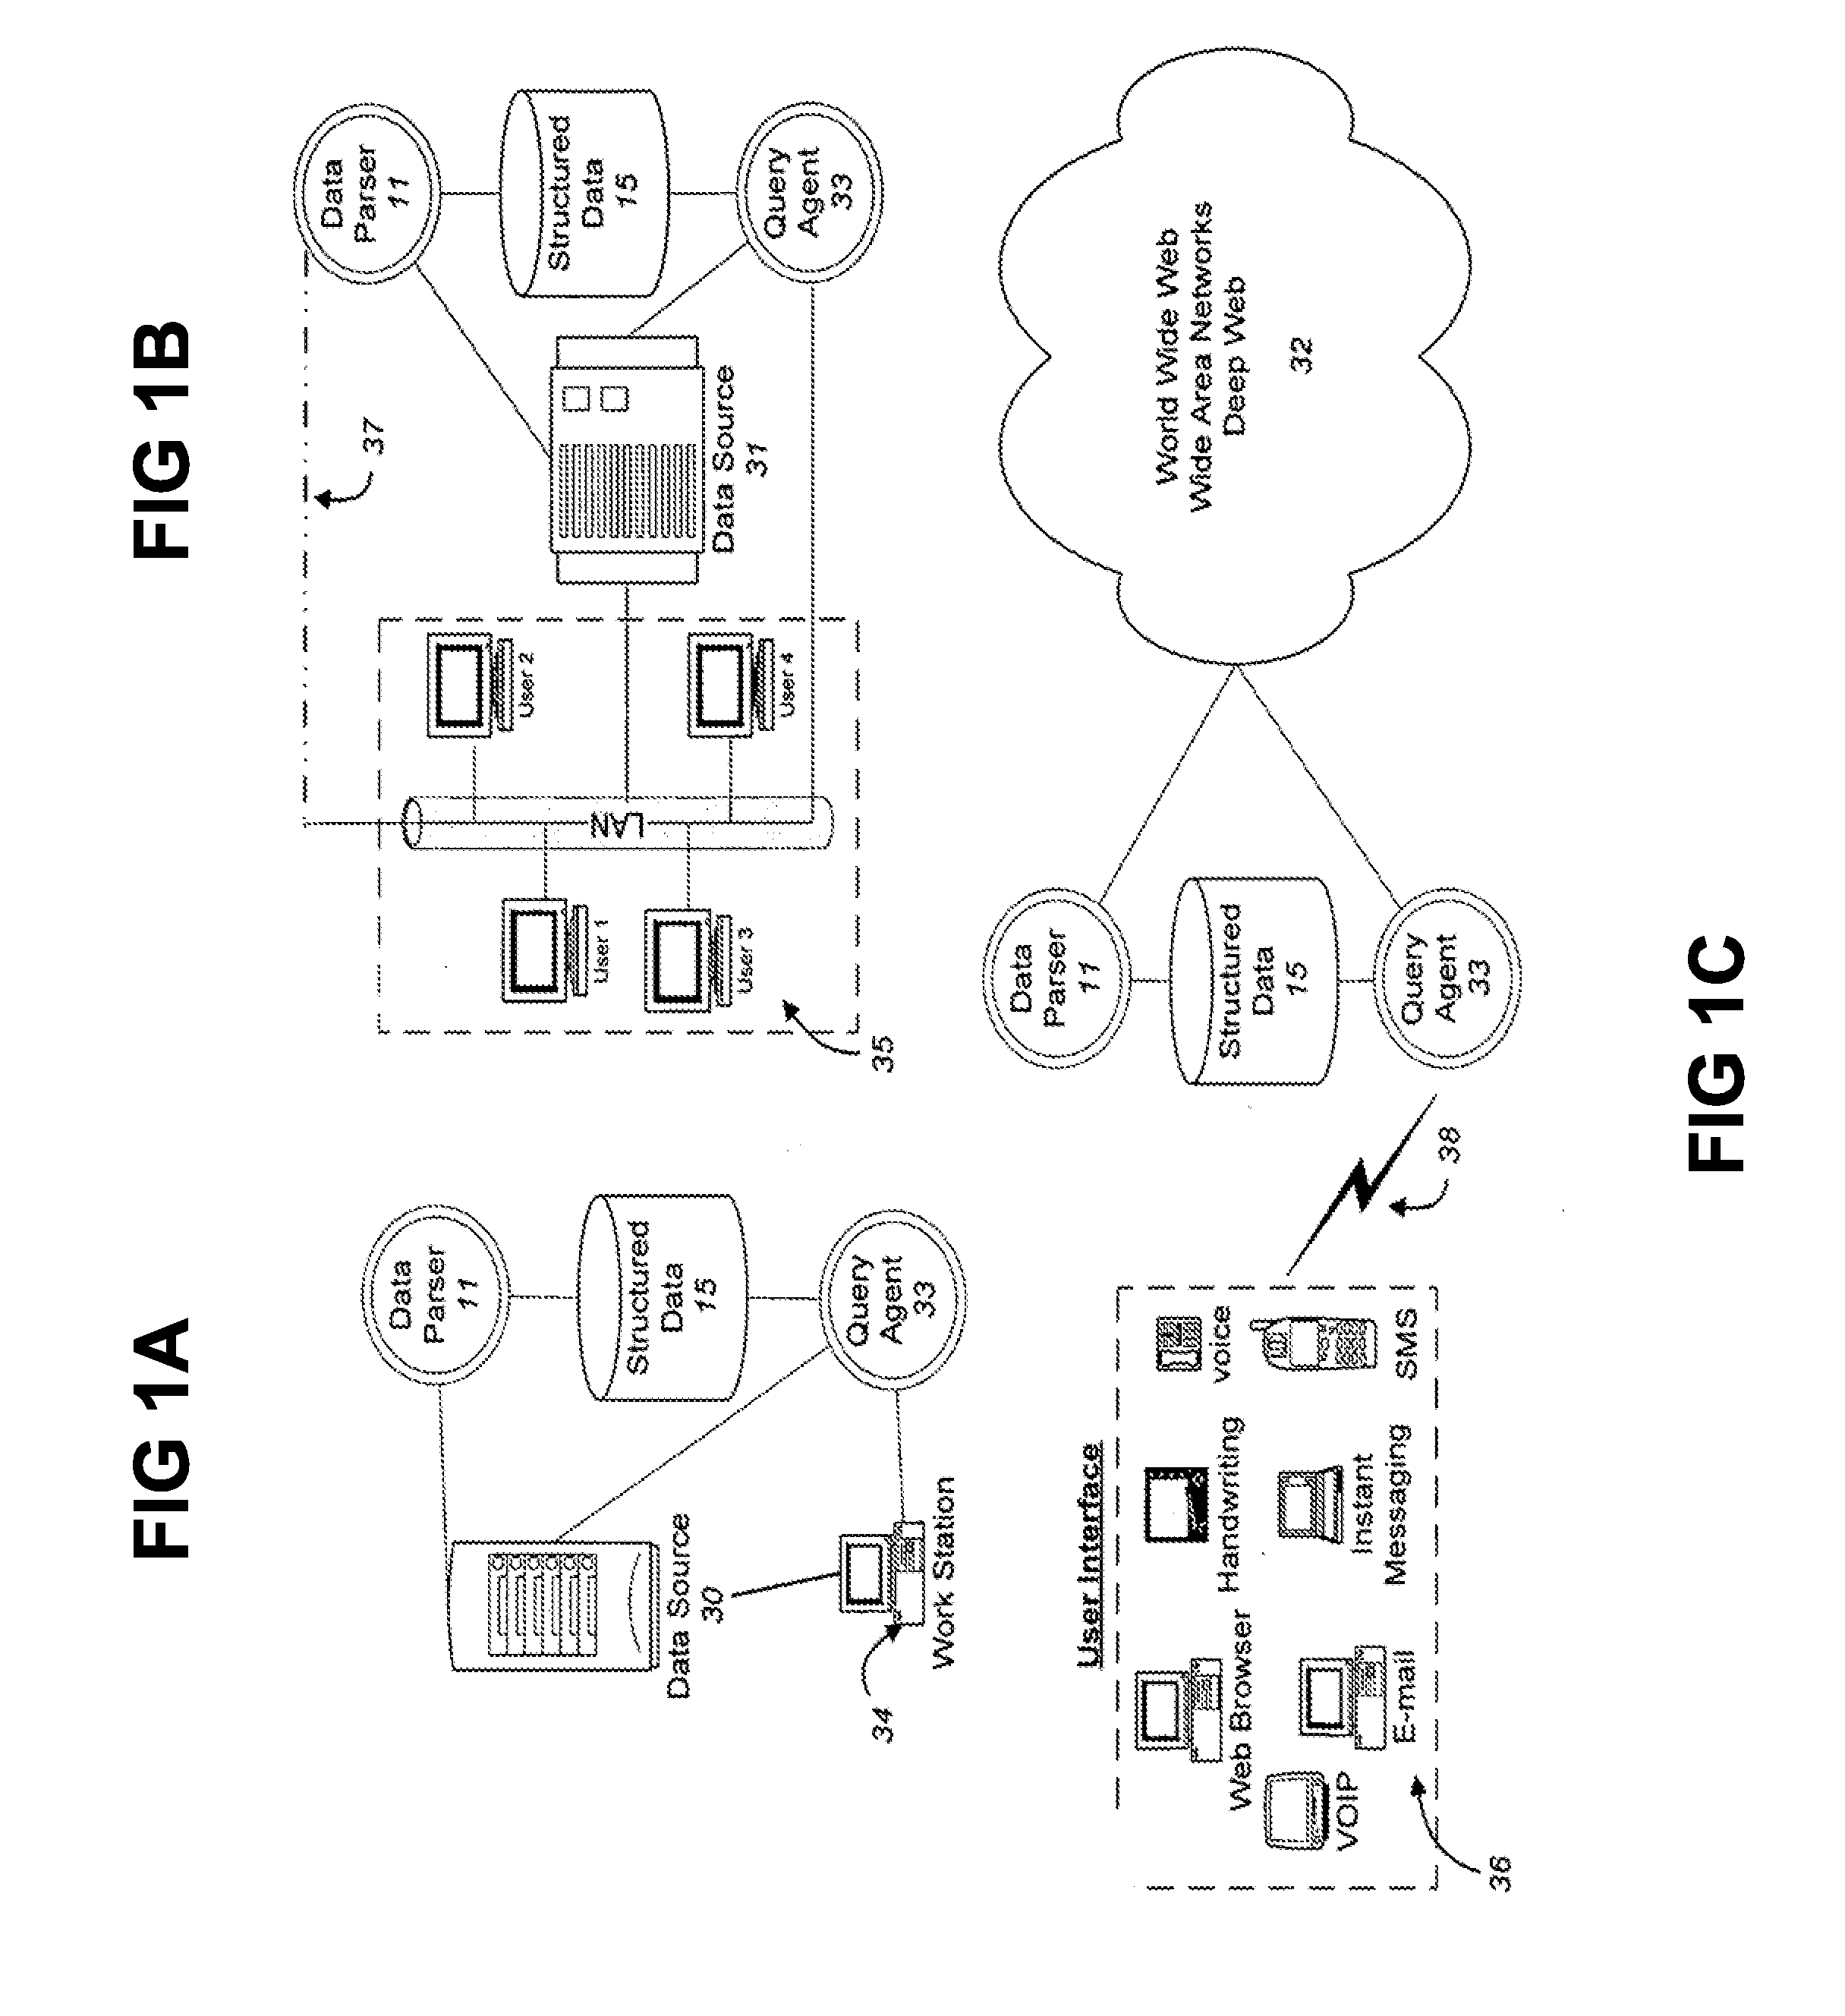 Telephonic information retrieval systems and methods